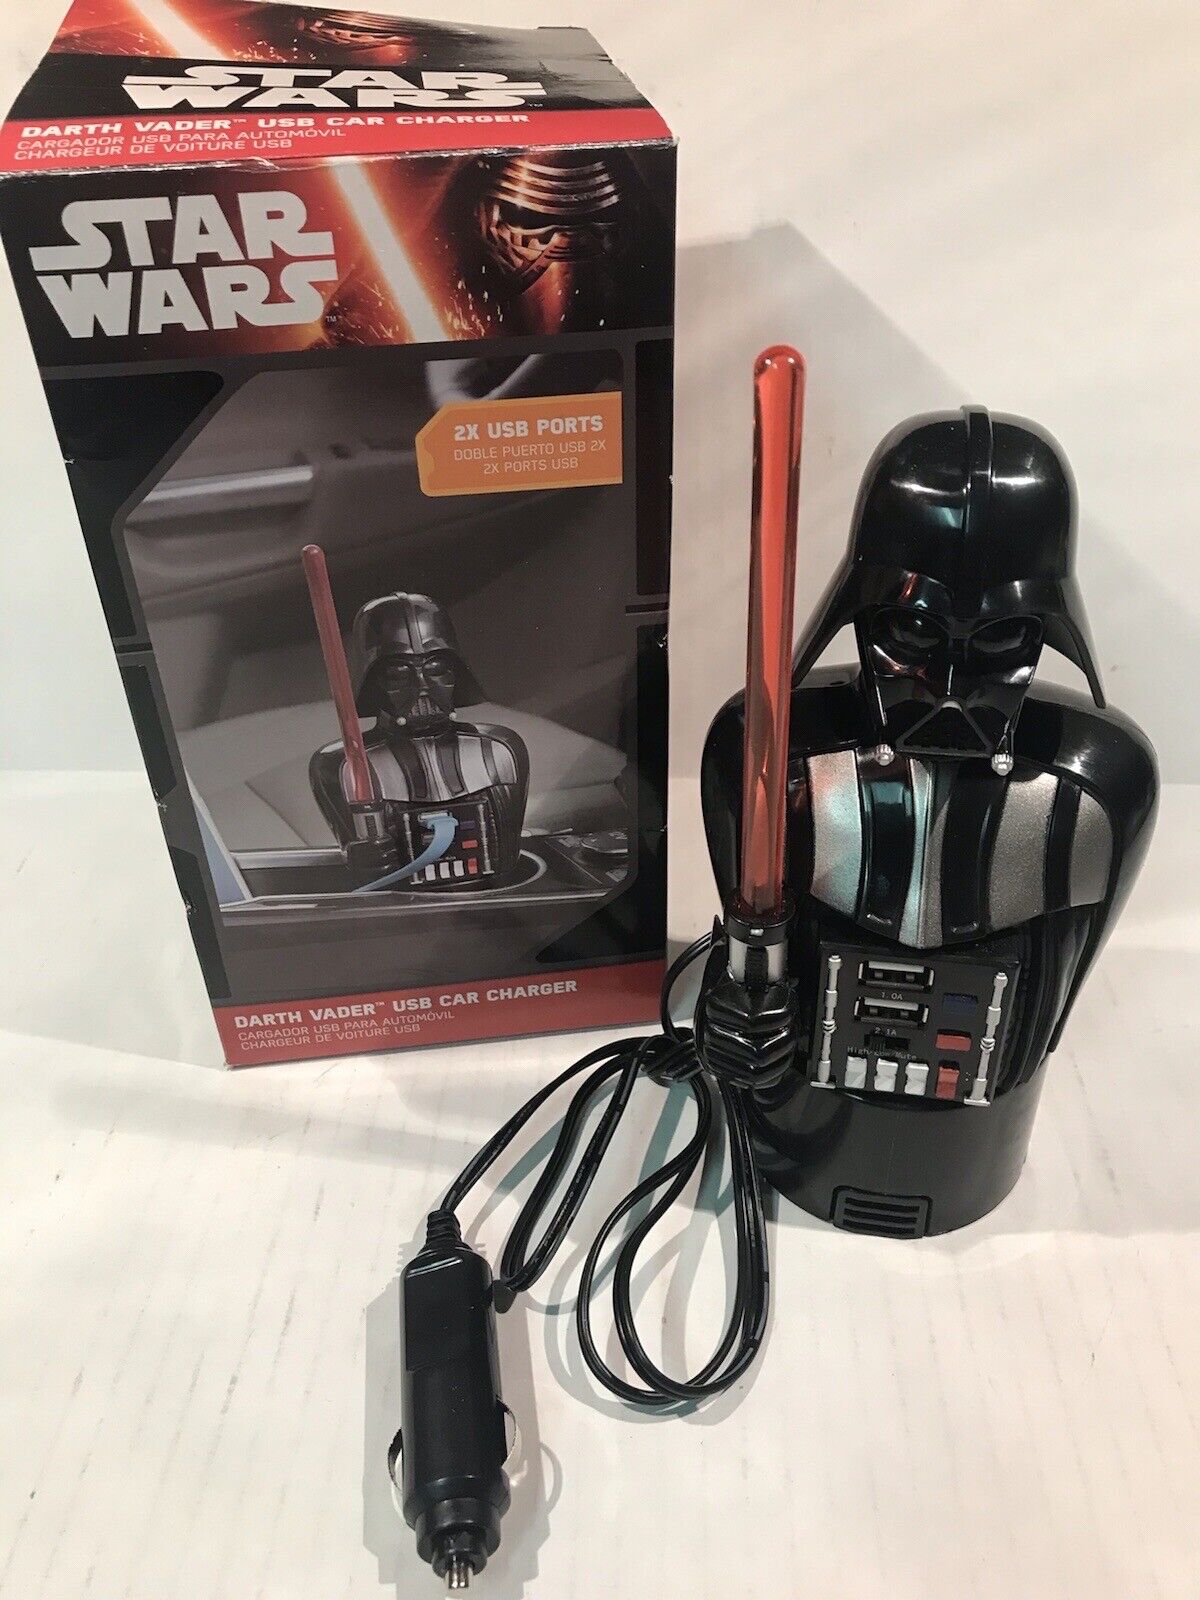 Star Wars Darth Vader USB Car Charger 2 USB Ports Charger Tested Works Cool